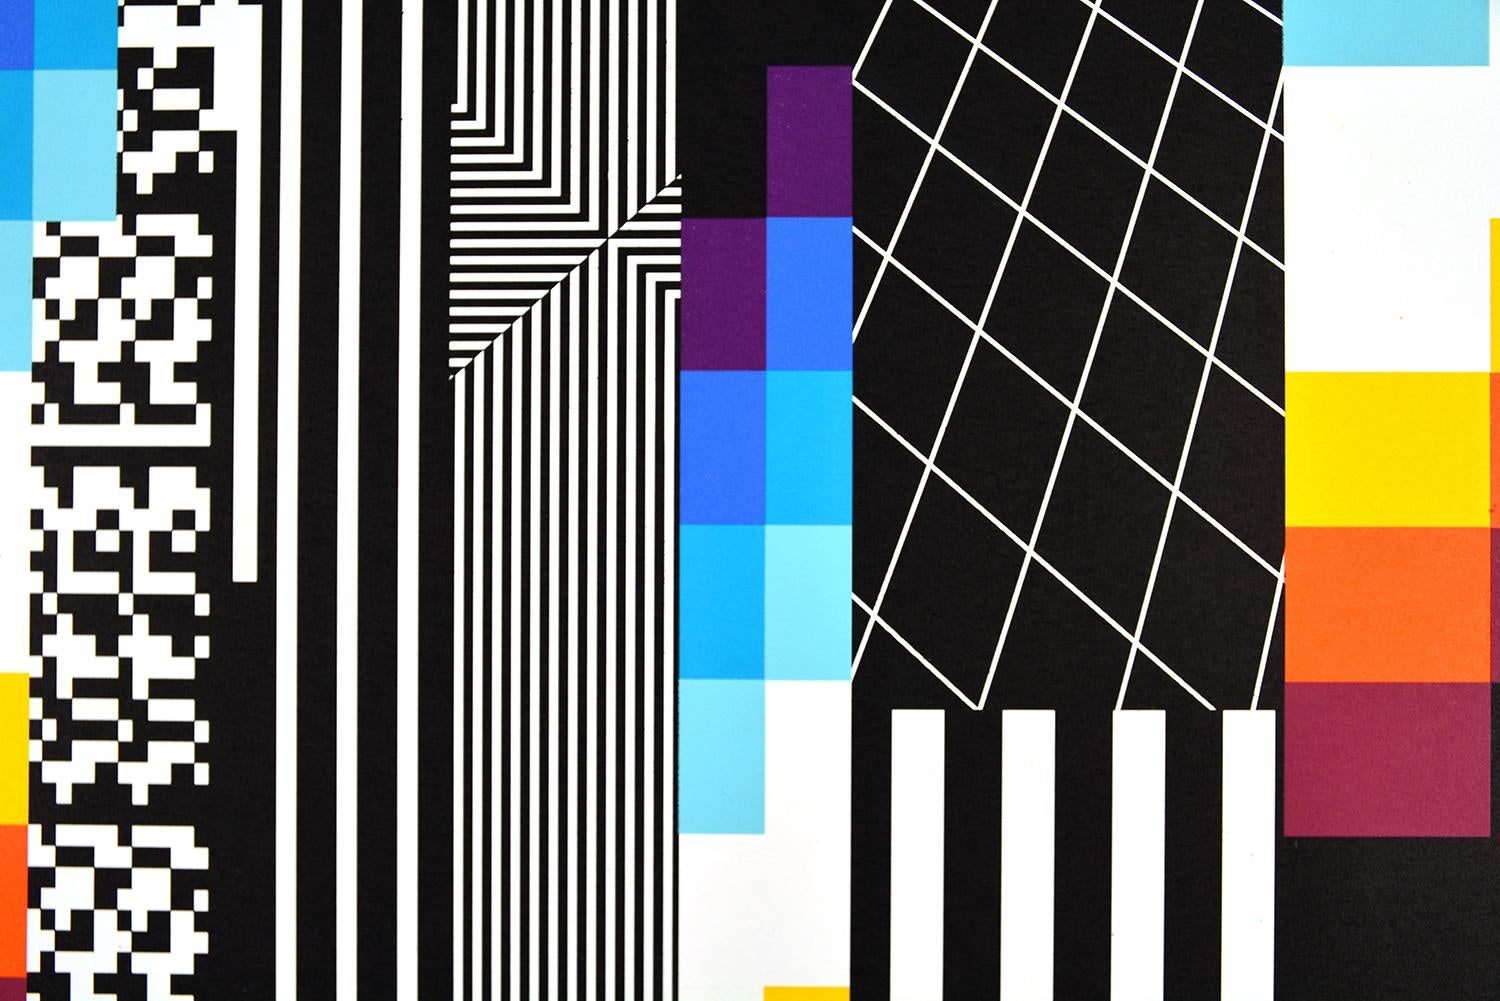 Felipe Pantone CHROMADYNA MICAP #4
Date of creation: 2020
Medium: Lithograph on paper
Edition number: 24/30
Size: 75.5 x 55.5 cm
Condition: New, in mint condition and never framed
Lithograph on paper hand signed and numbered on the back by the